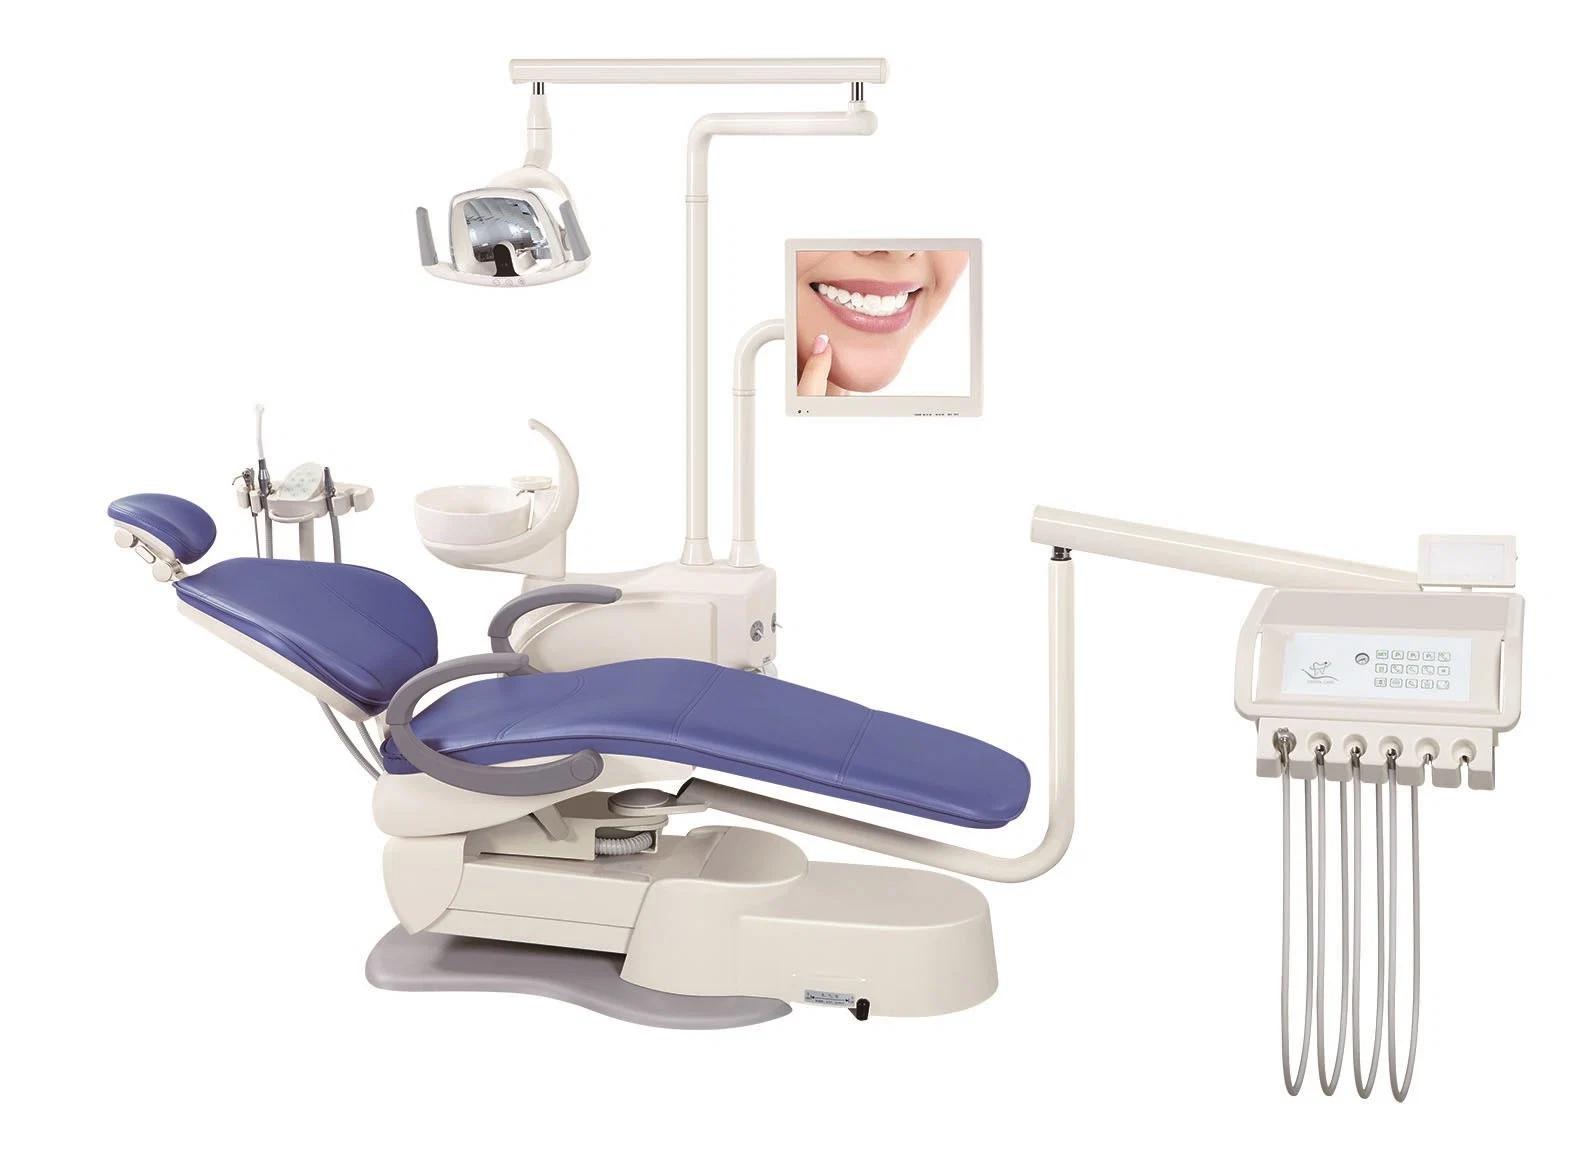 China Foshan Factory Price Right & Left Handed Dental Equipment Dental Chair Unit with 3 Memories